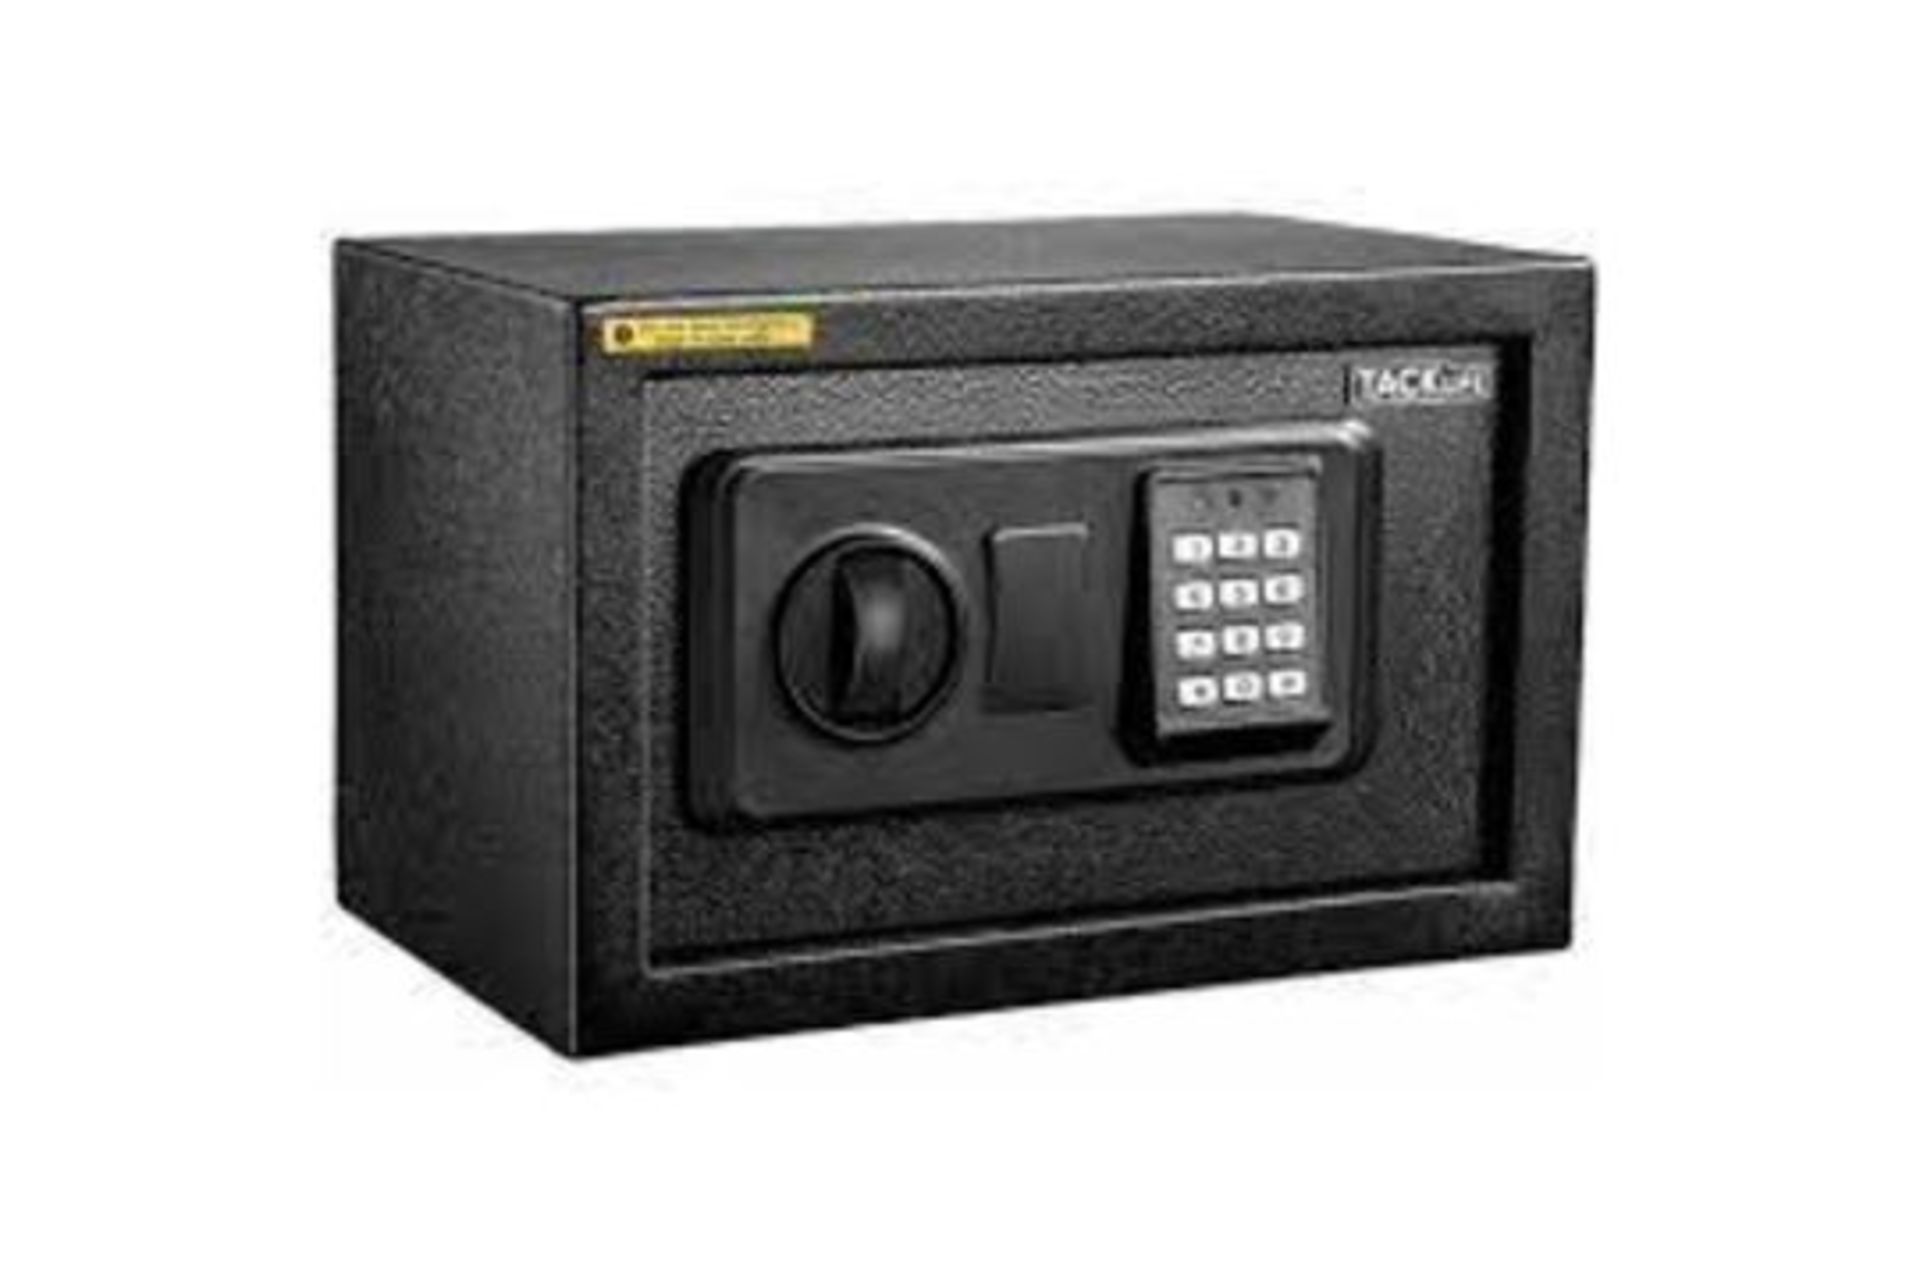 NEW BOXED HEAVY DUTY 14L DIGITAL SAFE. (HES25A) ROW 15 Built from sturdy steel and equipped with